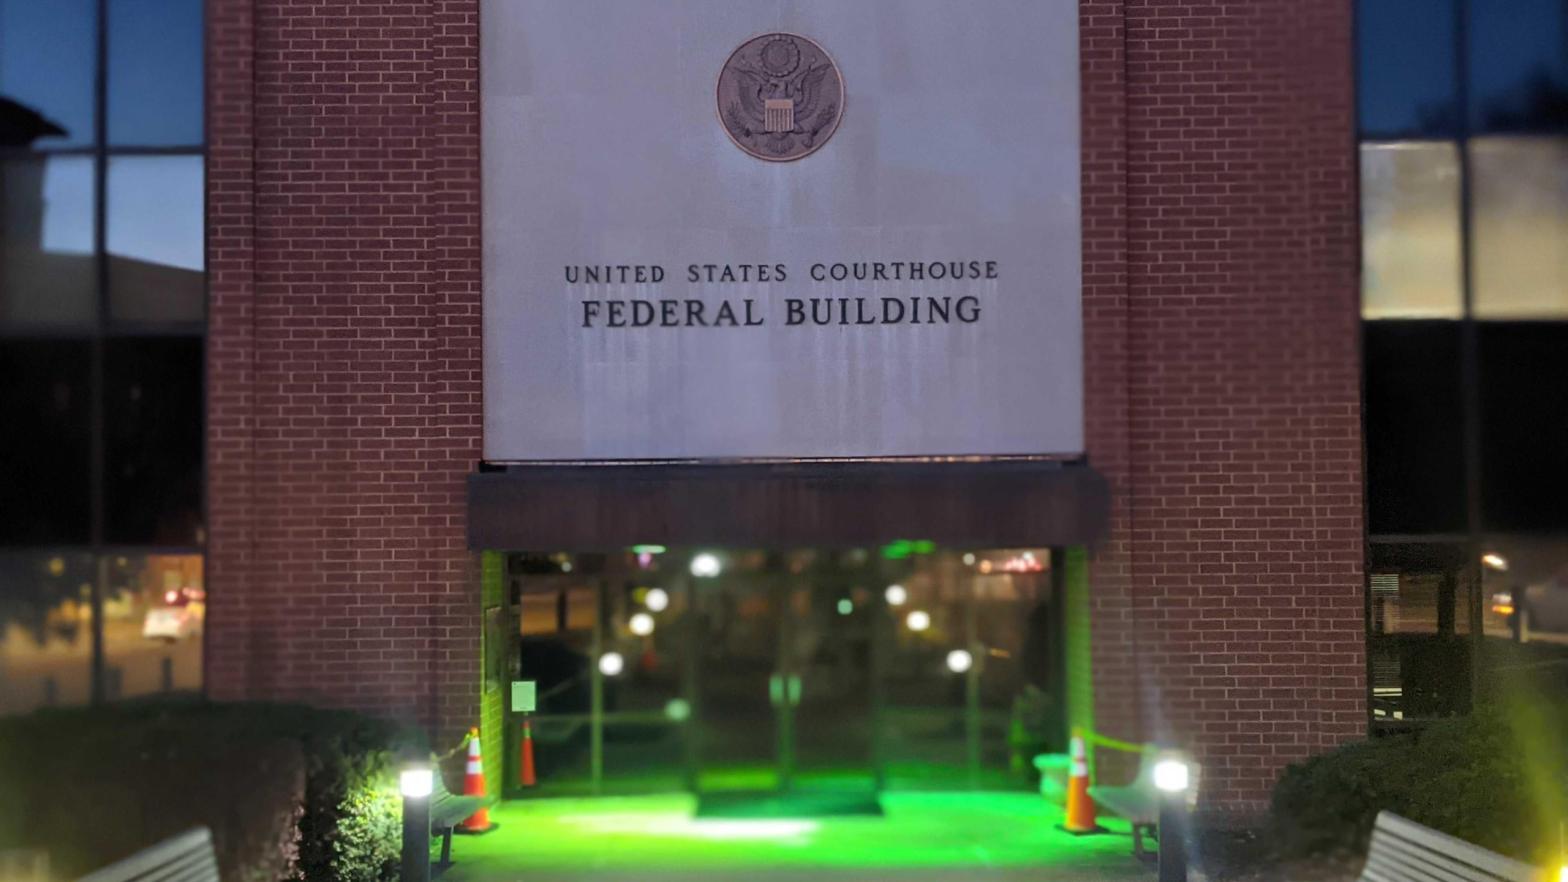 The federal courthouse in Charlottesville, Virginia, as seen on Nov. 12, 2021. (Photo: Tom McKay / Gizmodo)